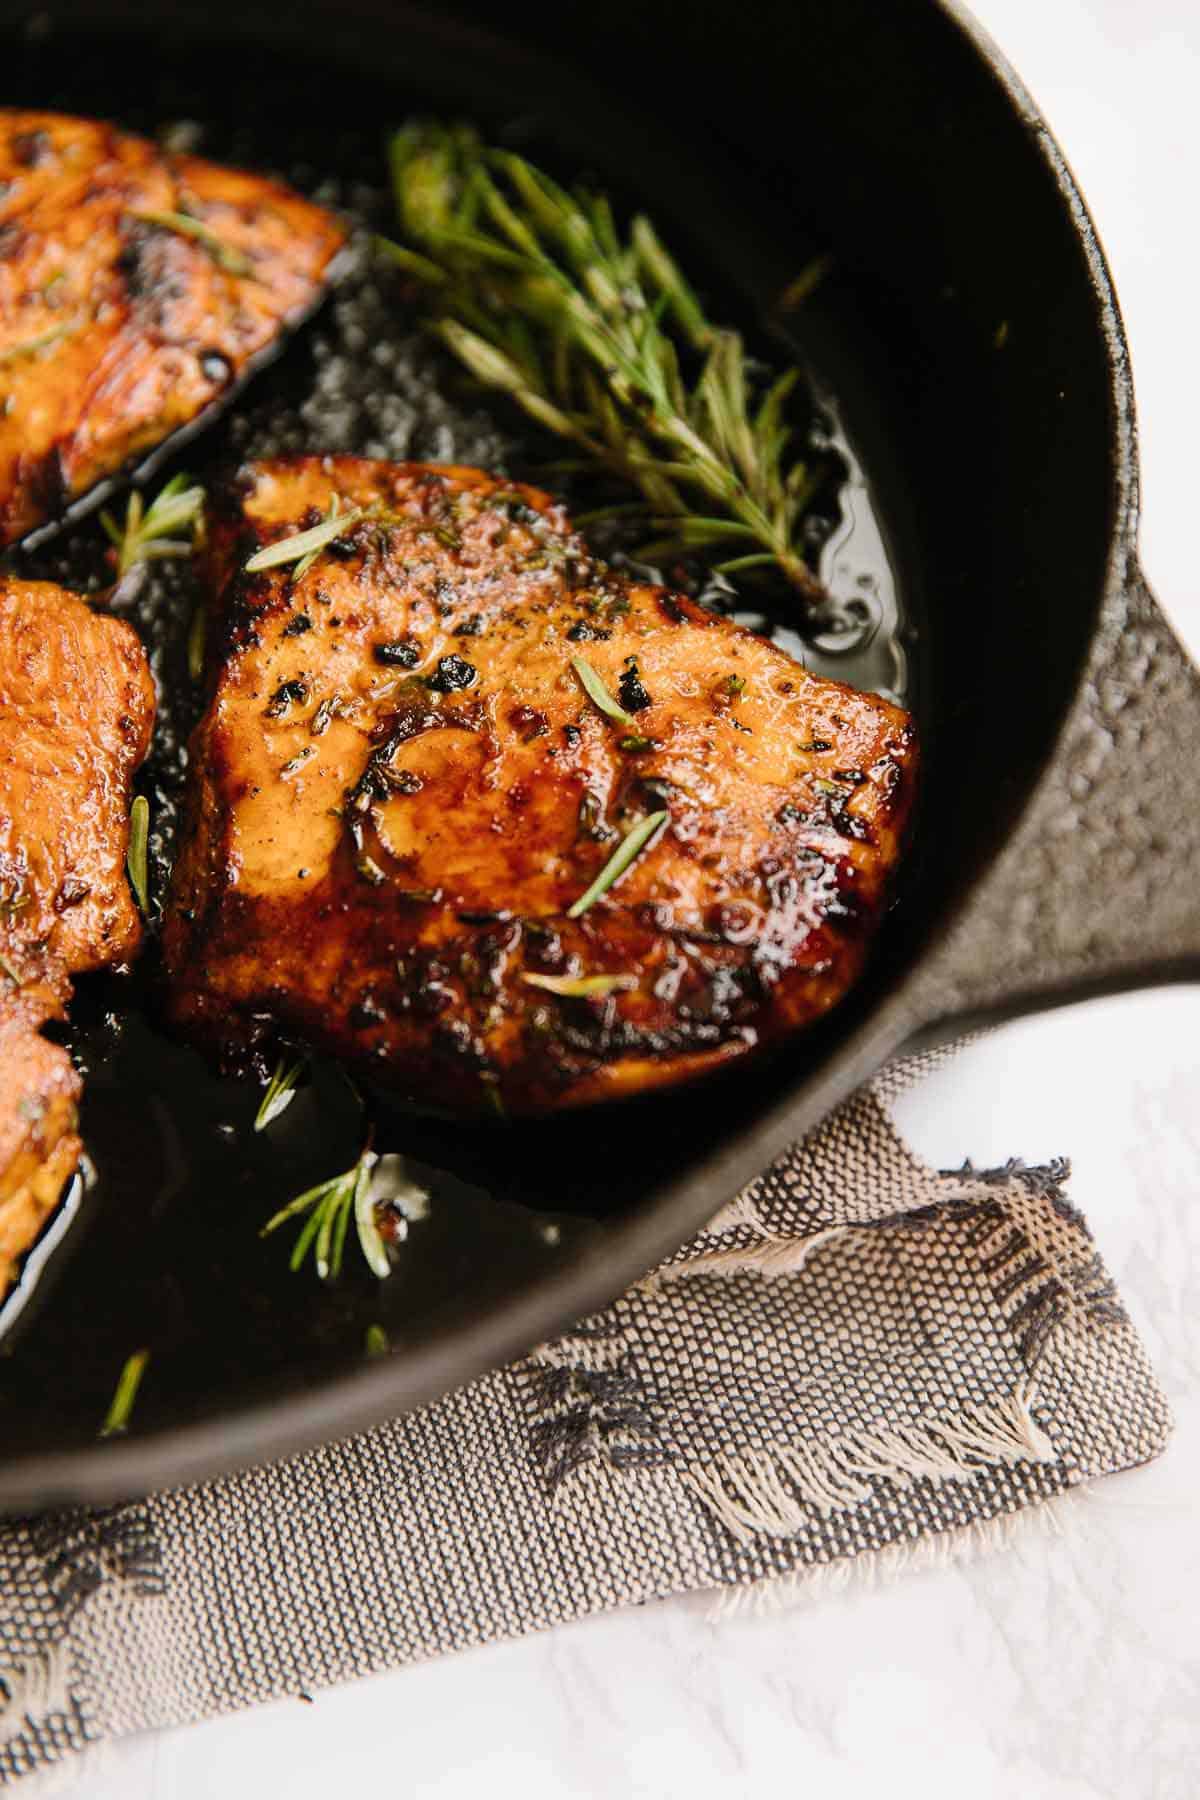 Balsamic Rosemary Chicken cooked in a skillet with fresh rosemary sprigs.